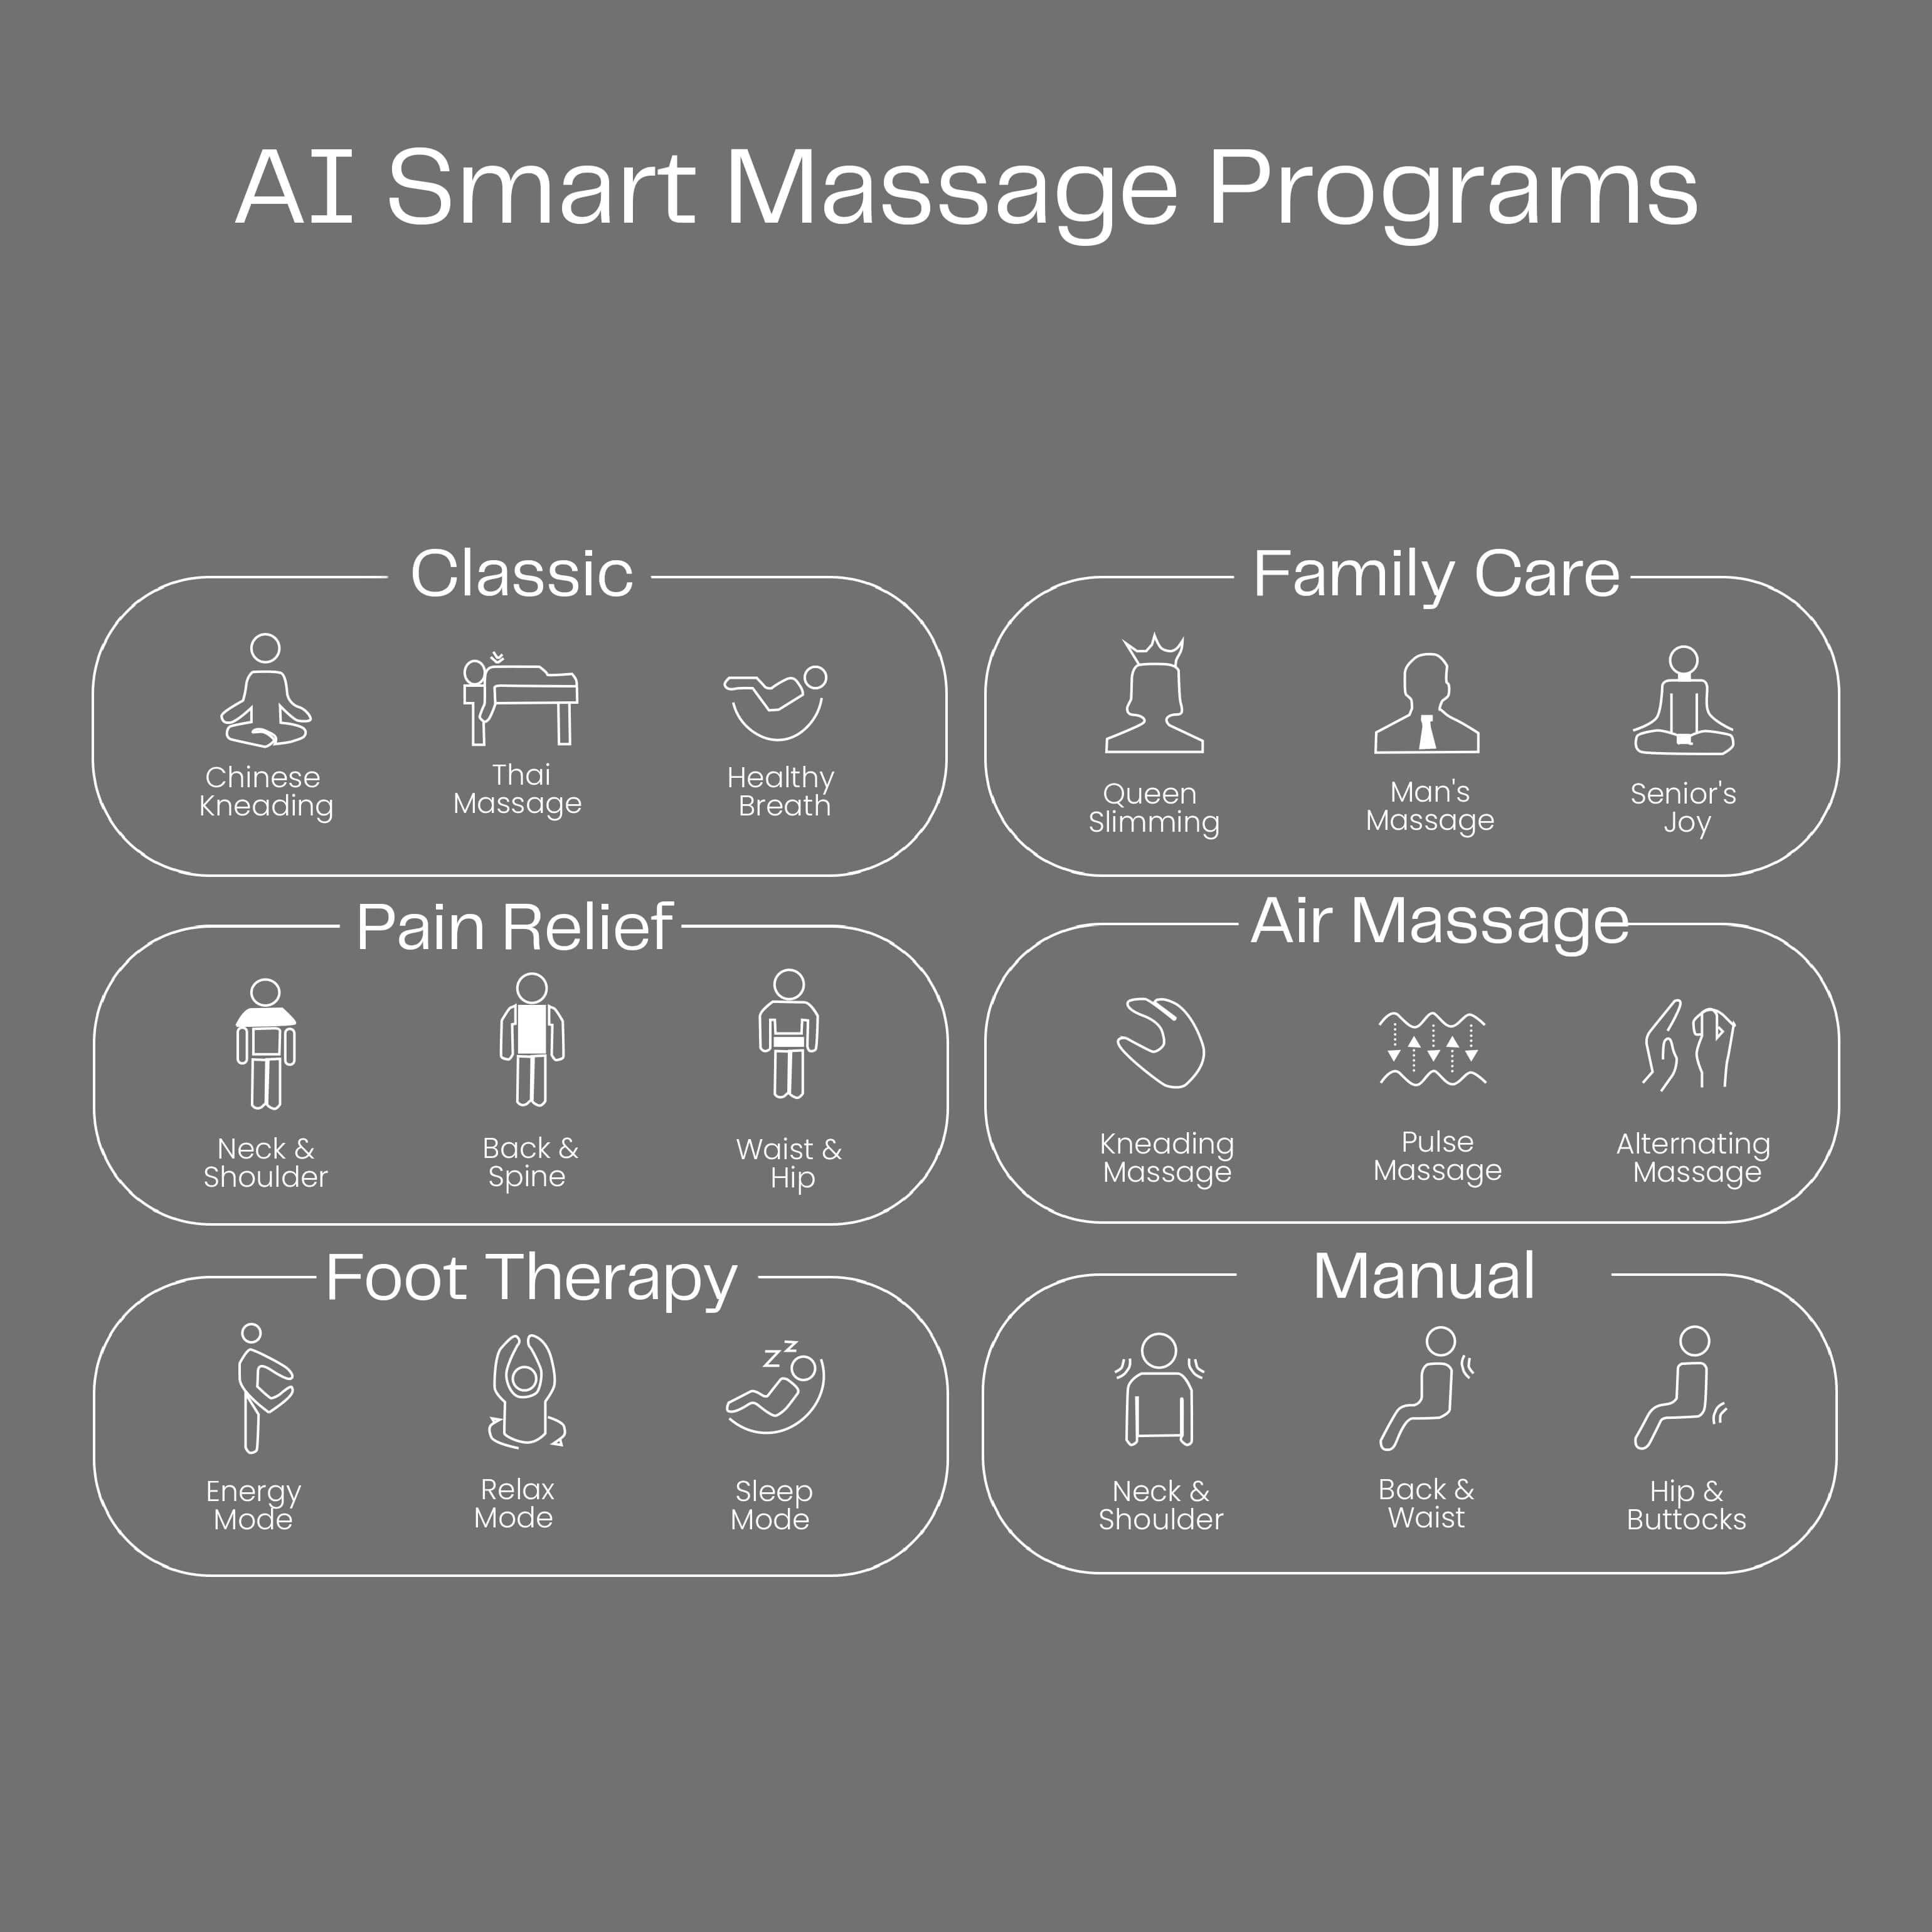 Various AI smart massage programs and modes including Classic, Family Care, Pain Relief, Air Massage, Foot Therapy, and Manual settings.